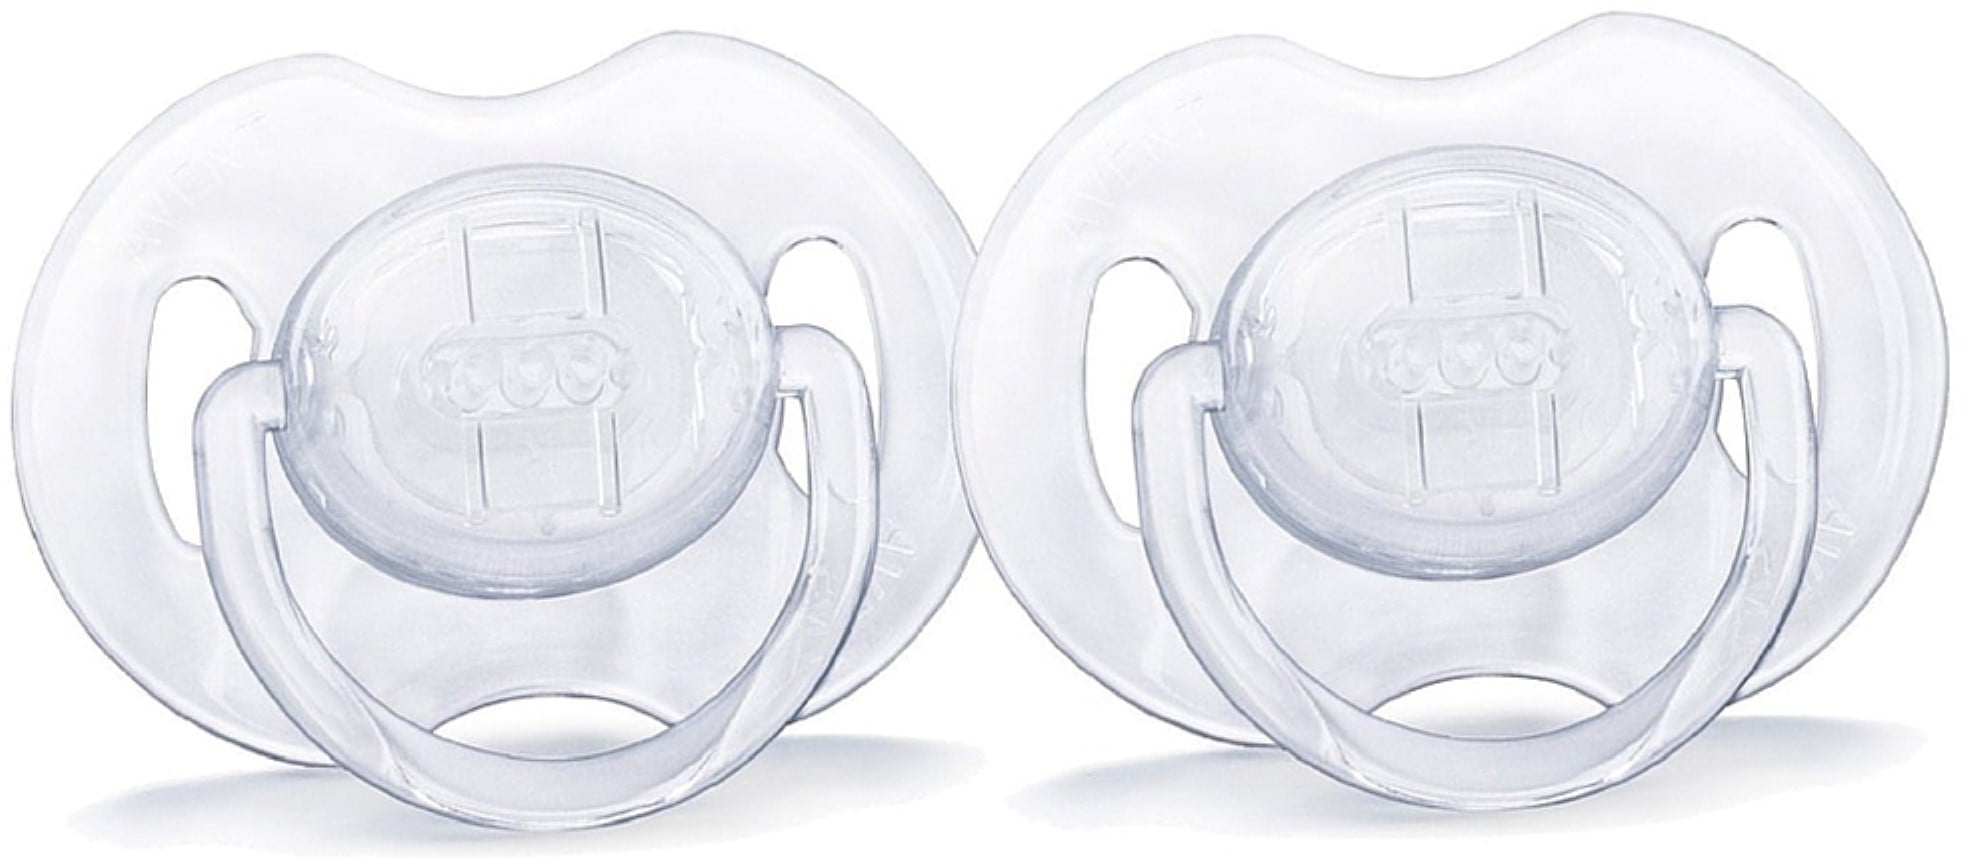 Philips Avent Translucent Silicone Baby Soothers│Dummies│Pacifier│Twin Pack│0-6m 